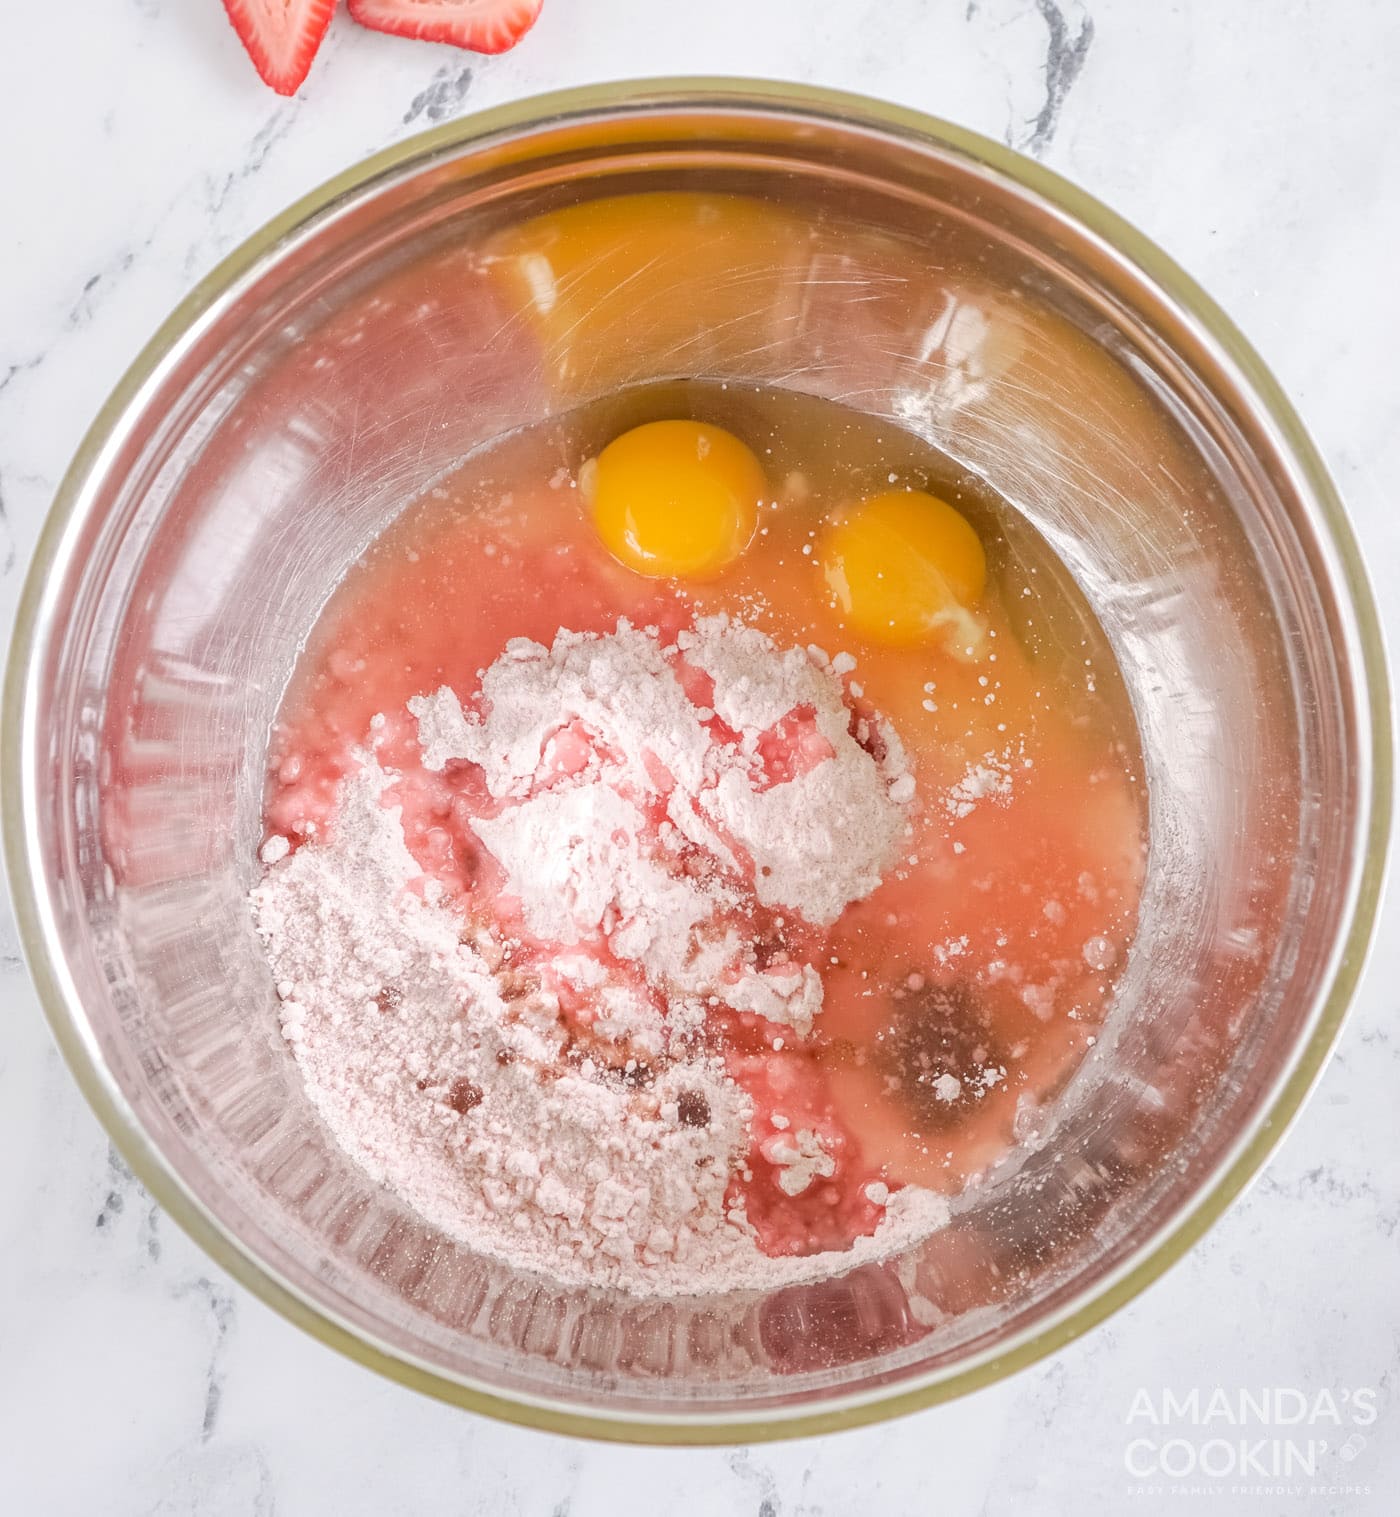 eggs, oil, and strawberry cake mix in a bowl